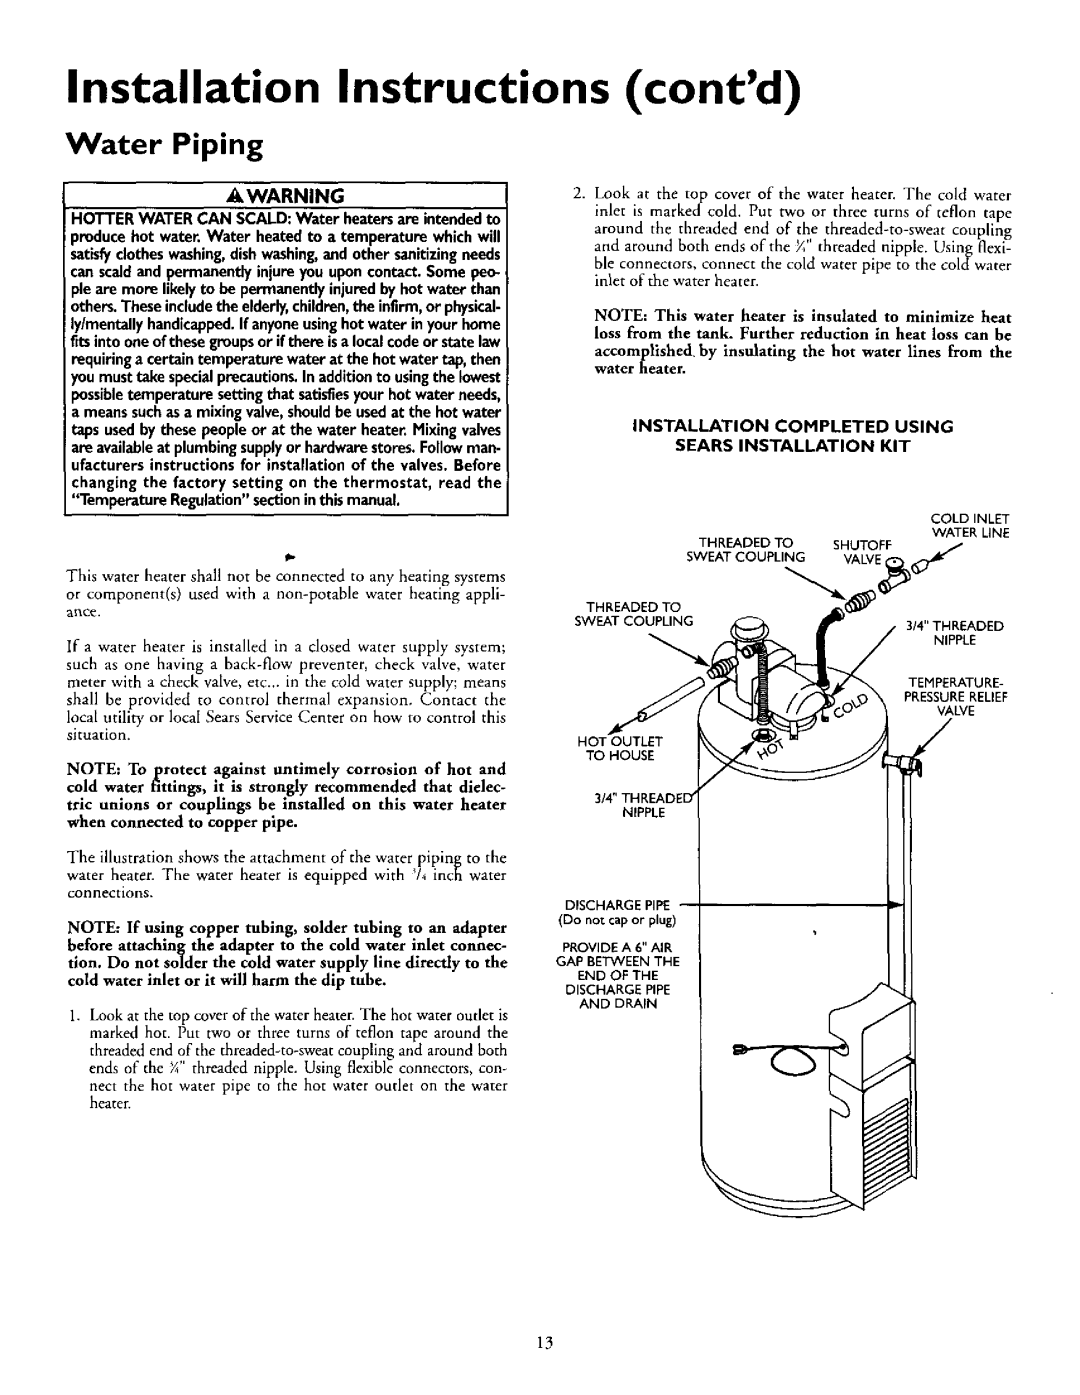 Kenmore 153.335846 Water Piping, Installation Instructions contd, Awarning, Temperature Regulationsectioninthismanual 